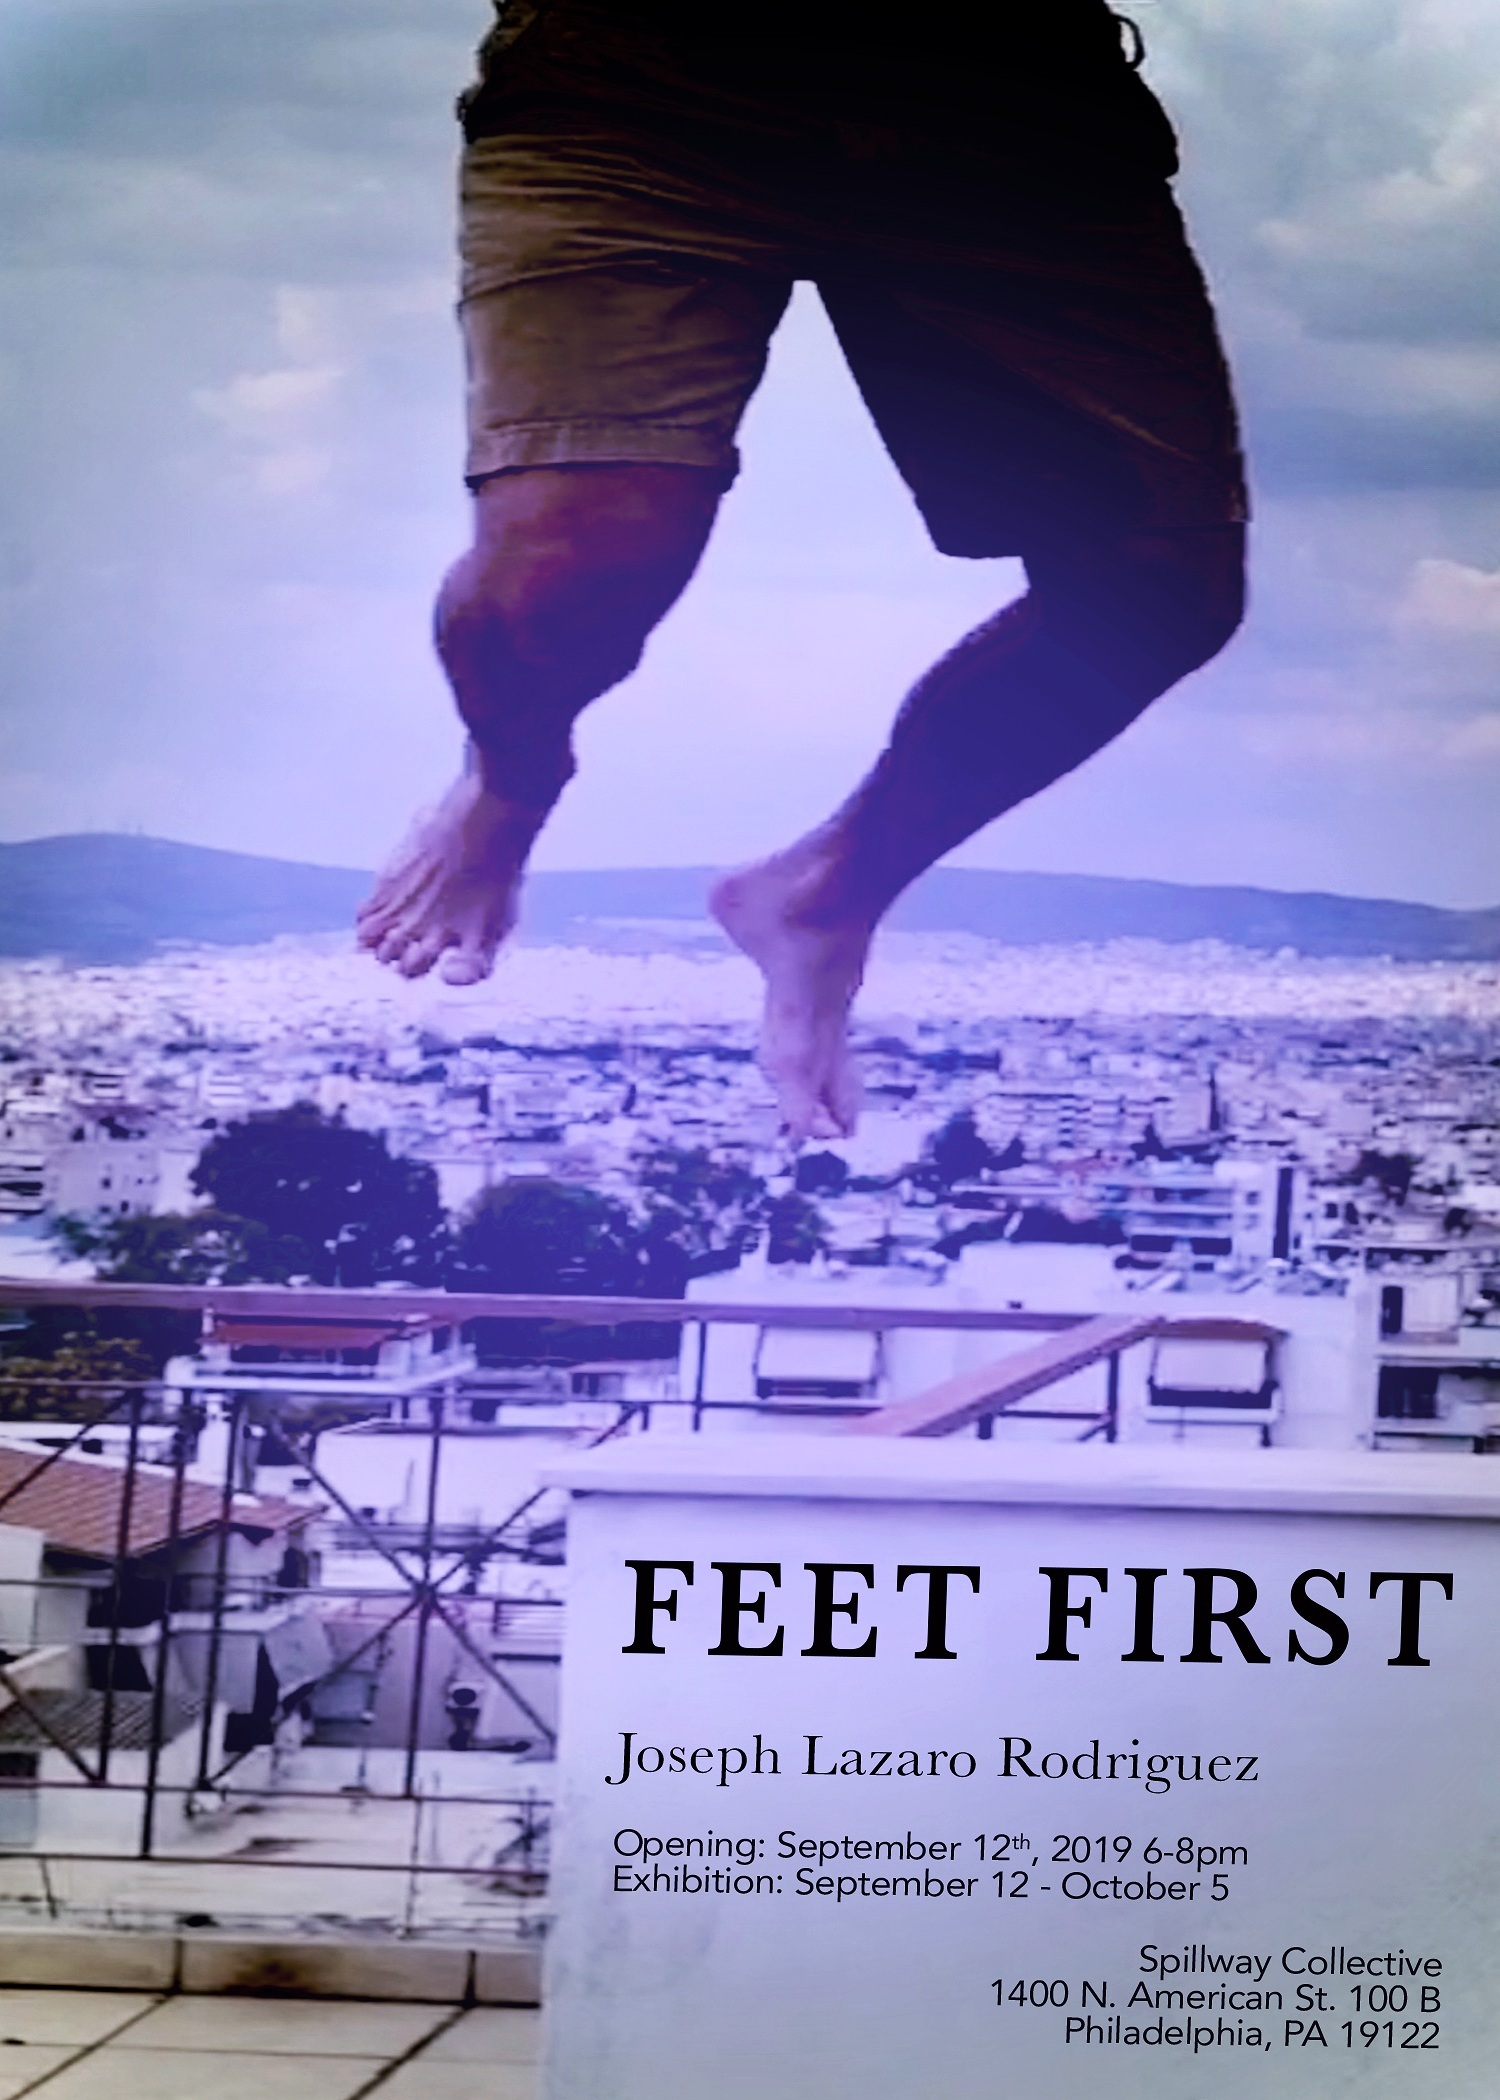 Feet First Collective